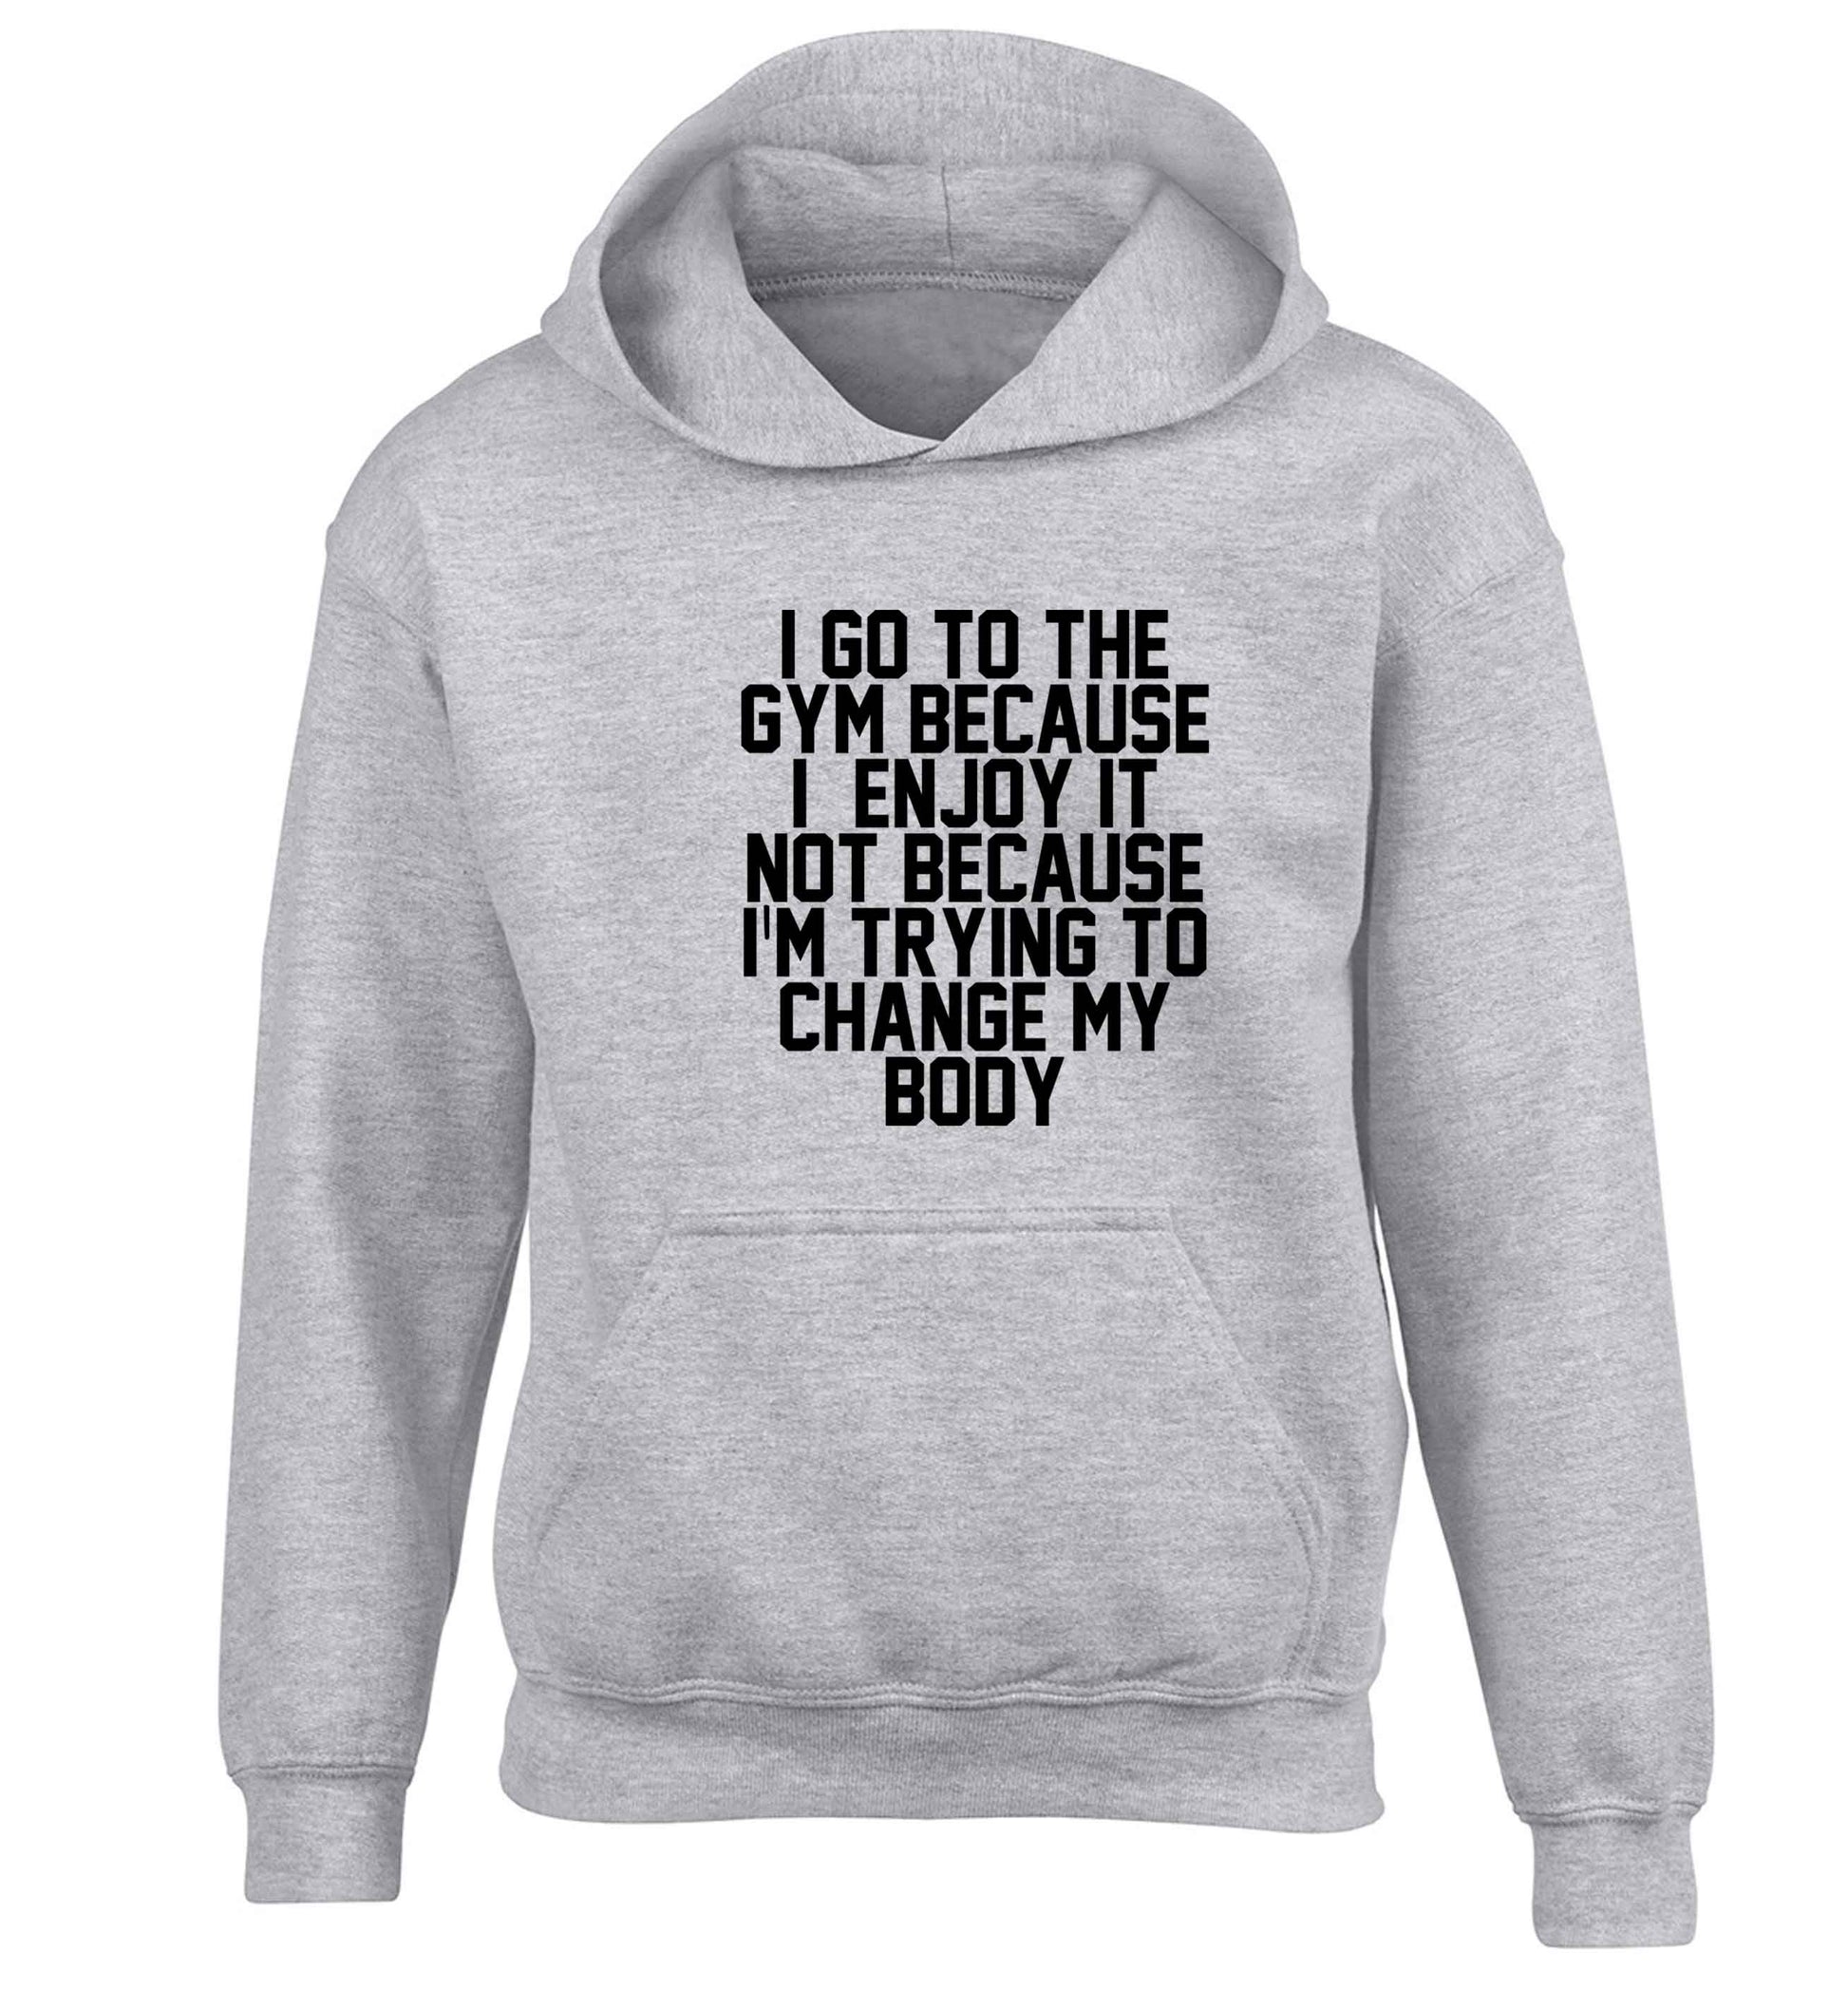 I go to the gym because I enjoy it not because I'm trying to change my body children's grey hoodie 12-13 Years